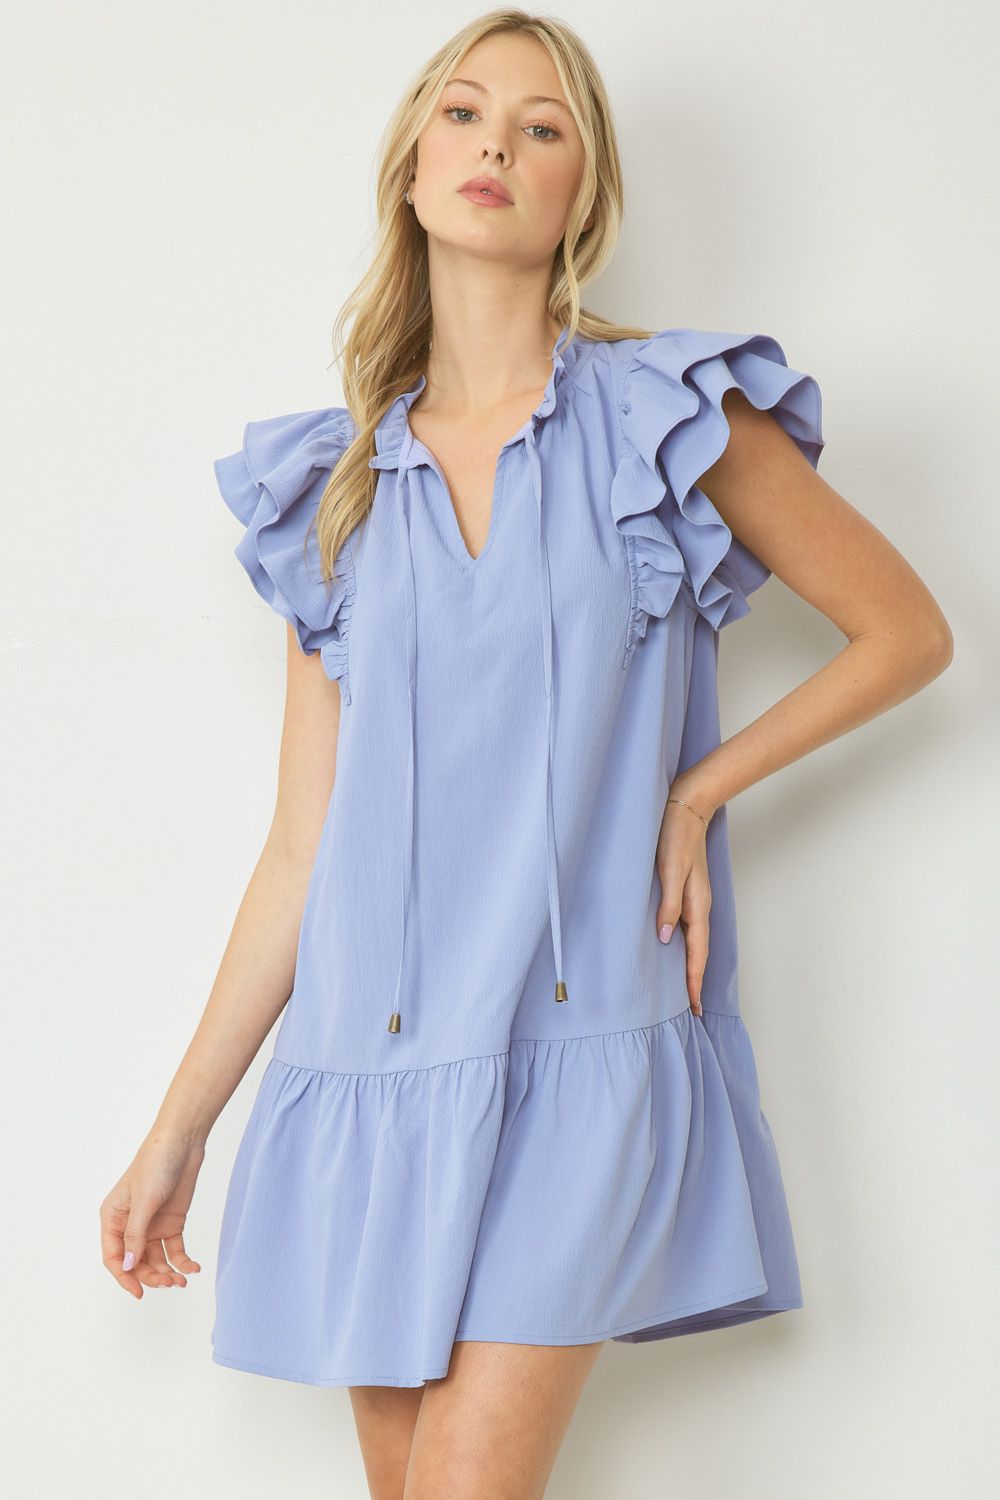 V-neck Ruffle Sleeve tiered mini dress featuring self tie closure at front neck - 2 Colors